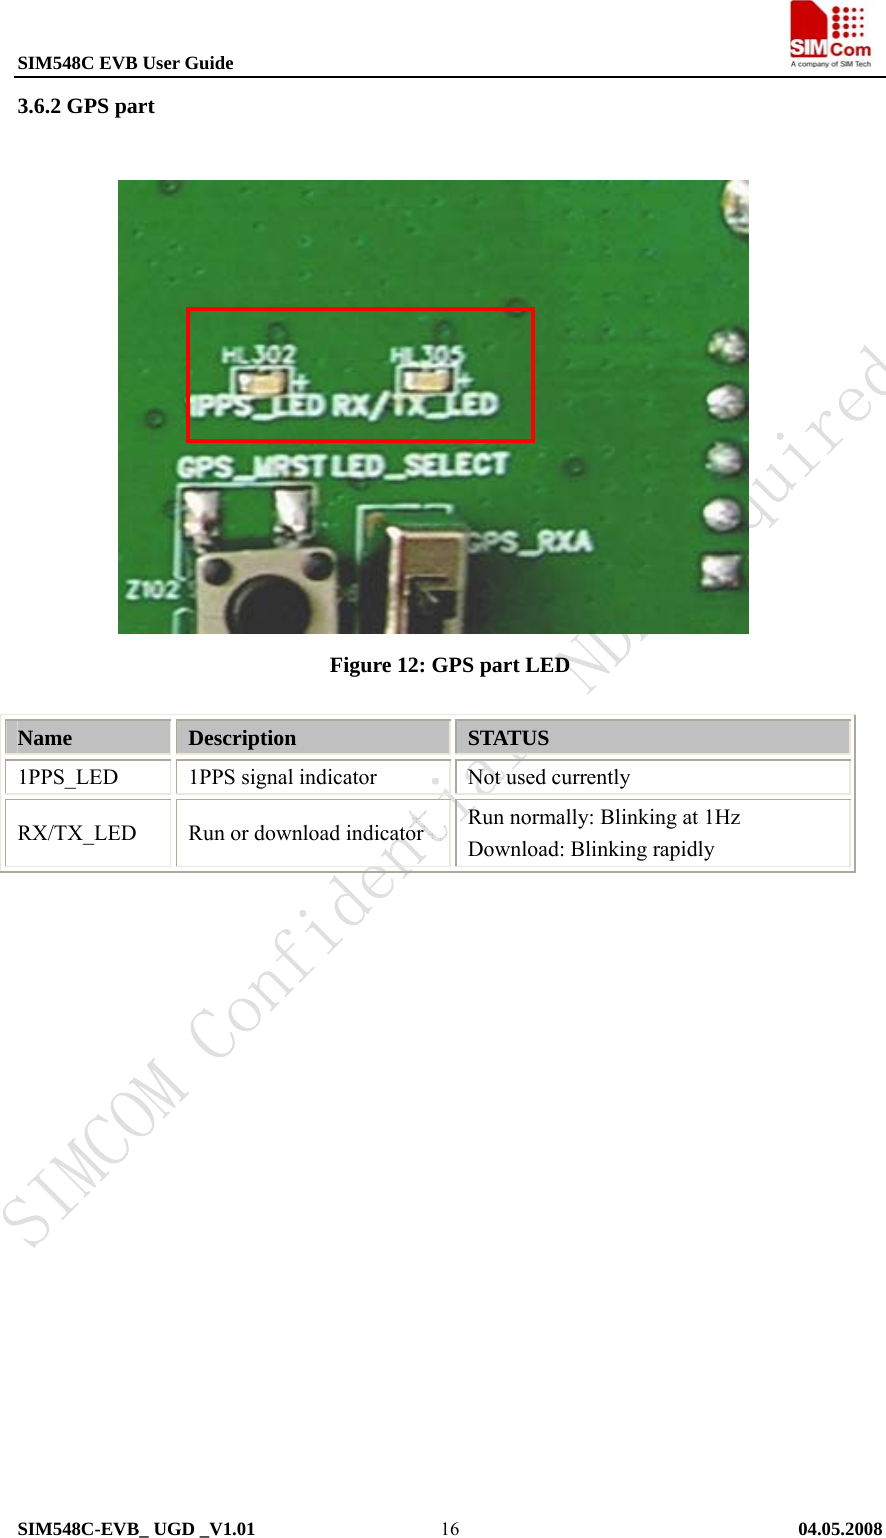 SIM548C EVB User Guide                                                             SIM548C-EVB_ UGD _V1.01   04.05.2008   163.6.2 GPS part                Figure 12: GPS part LED  Name  Description  STATUS 1PPS_LED  1PPS signal indicator   Not used currently RX/TX_LED  Run or download indicator  Run normally: Blinking at 1Hz Download: Blinking rapidly  